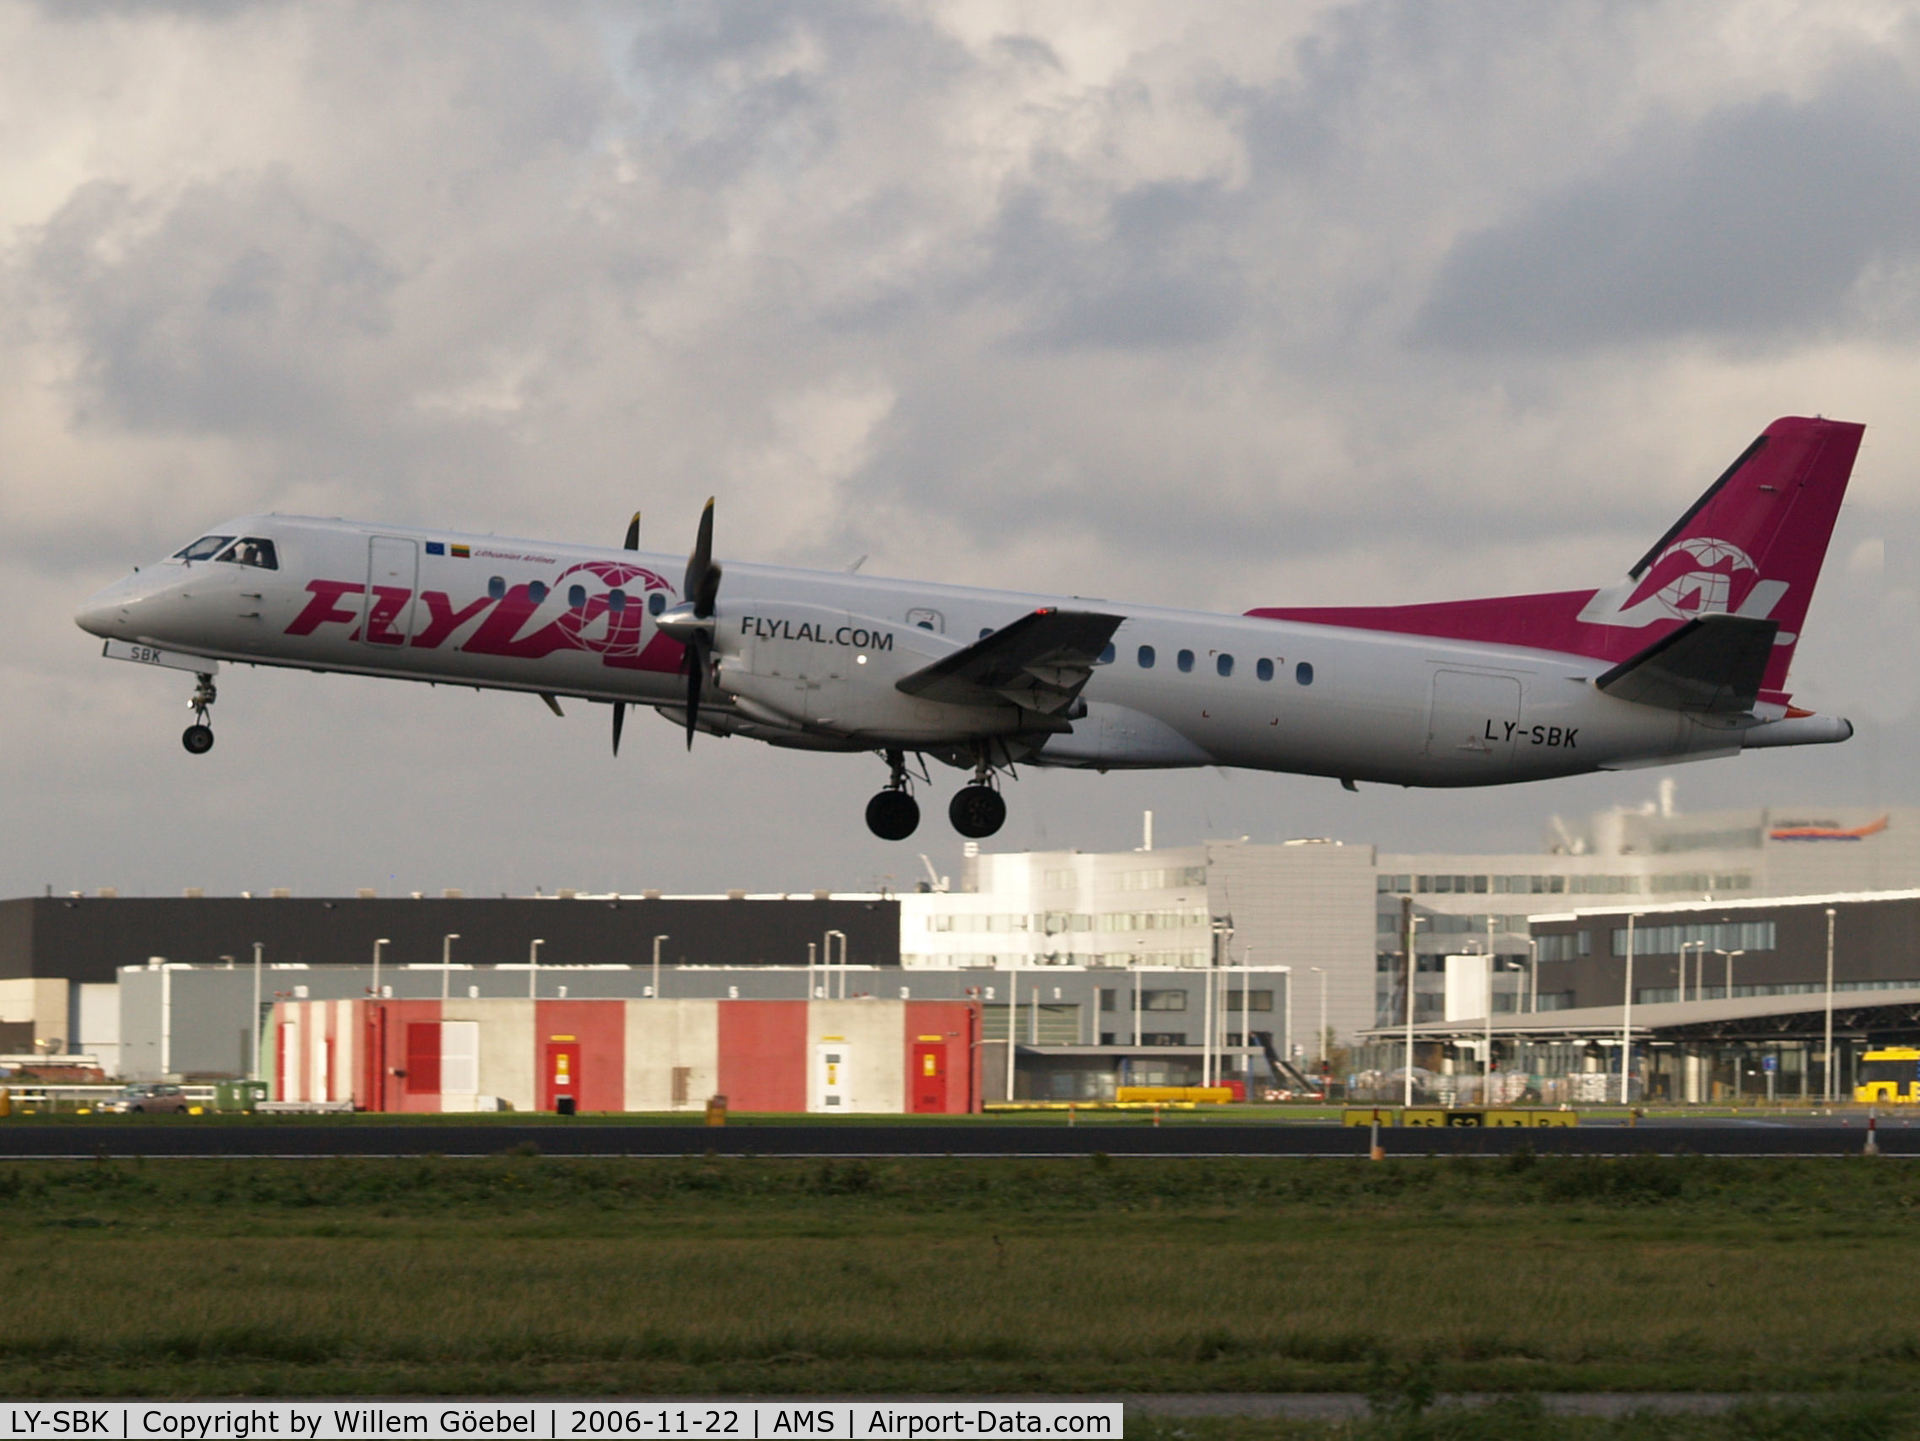 LY-SBK, 1996 Saab 2000 C/N 2000-035, Take off from runway 24 of Schiphol Airport